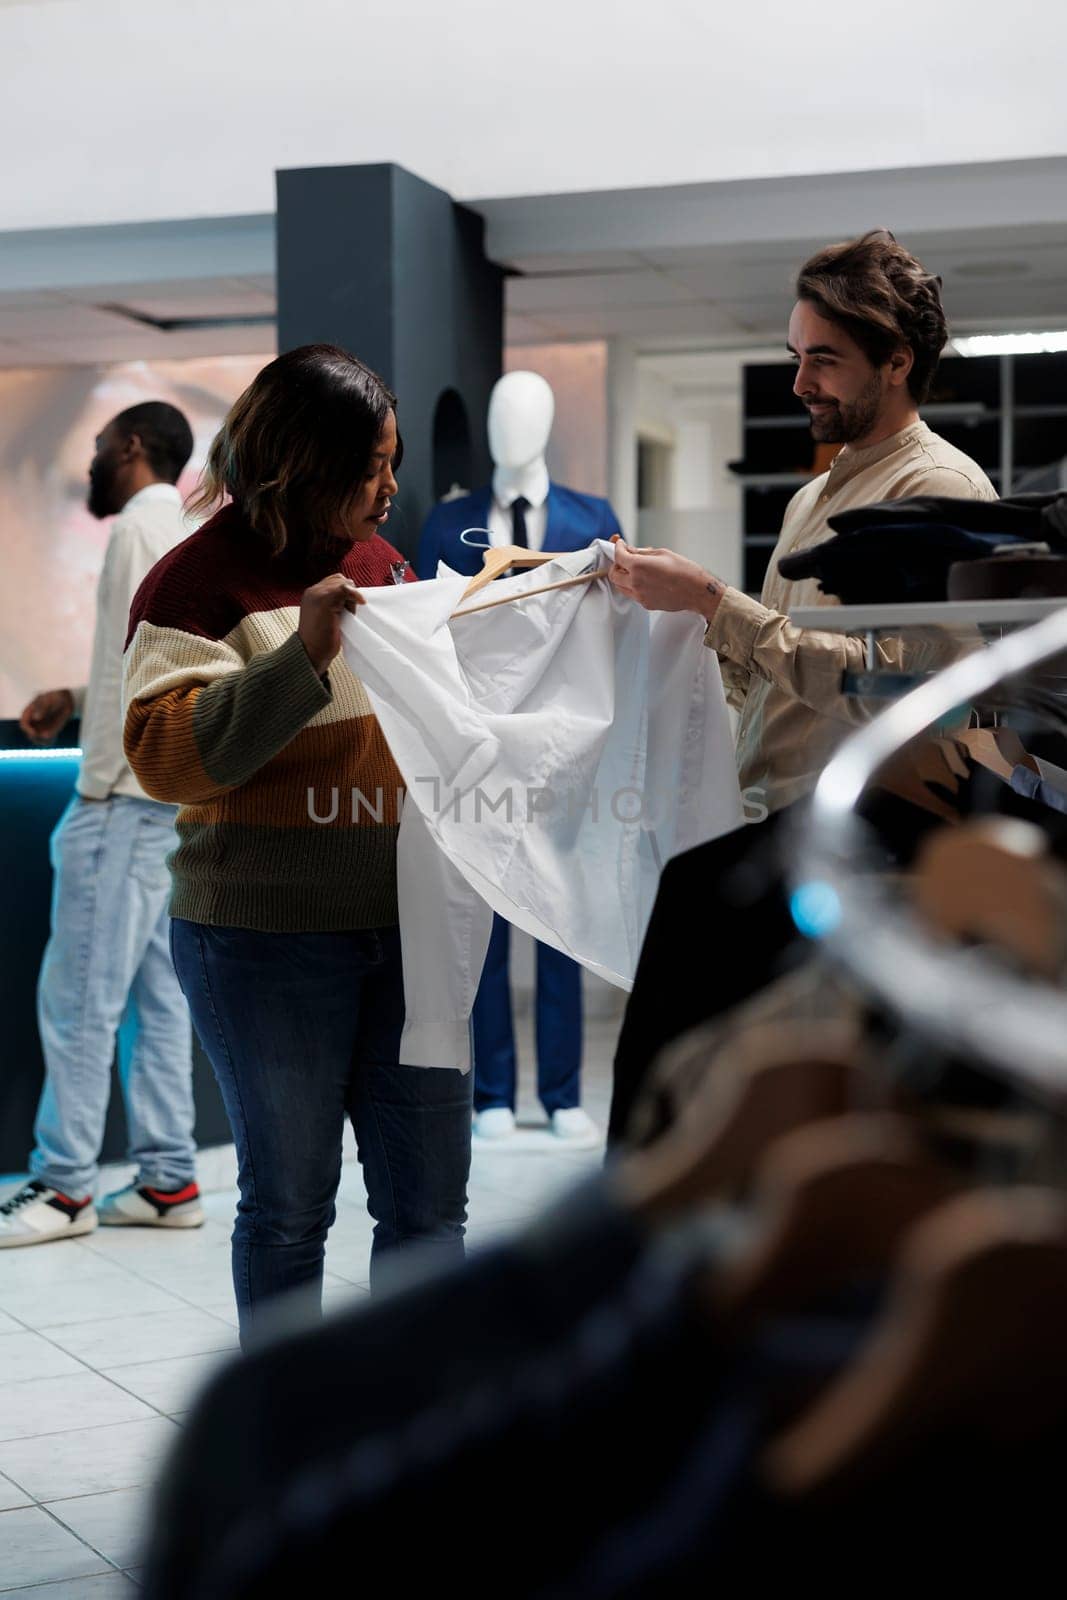 Fashion boutique diverse customer and assistant examining shirt fabric quality together. Clothing store caucasian man consultant providing woman client guidance on size and style